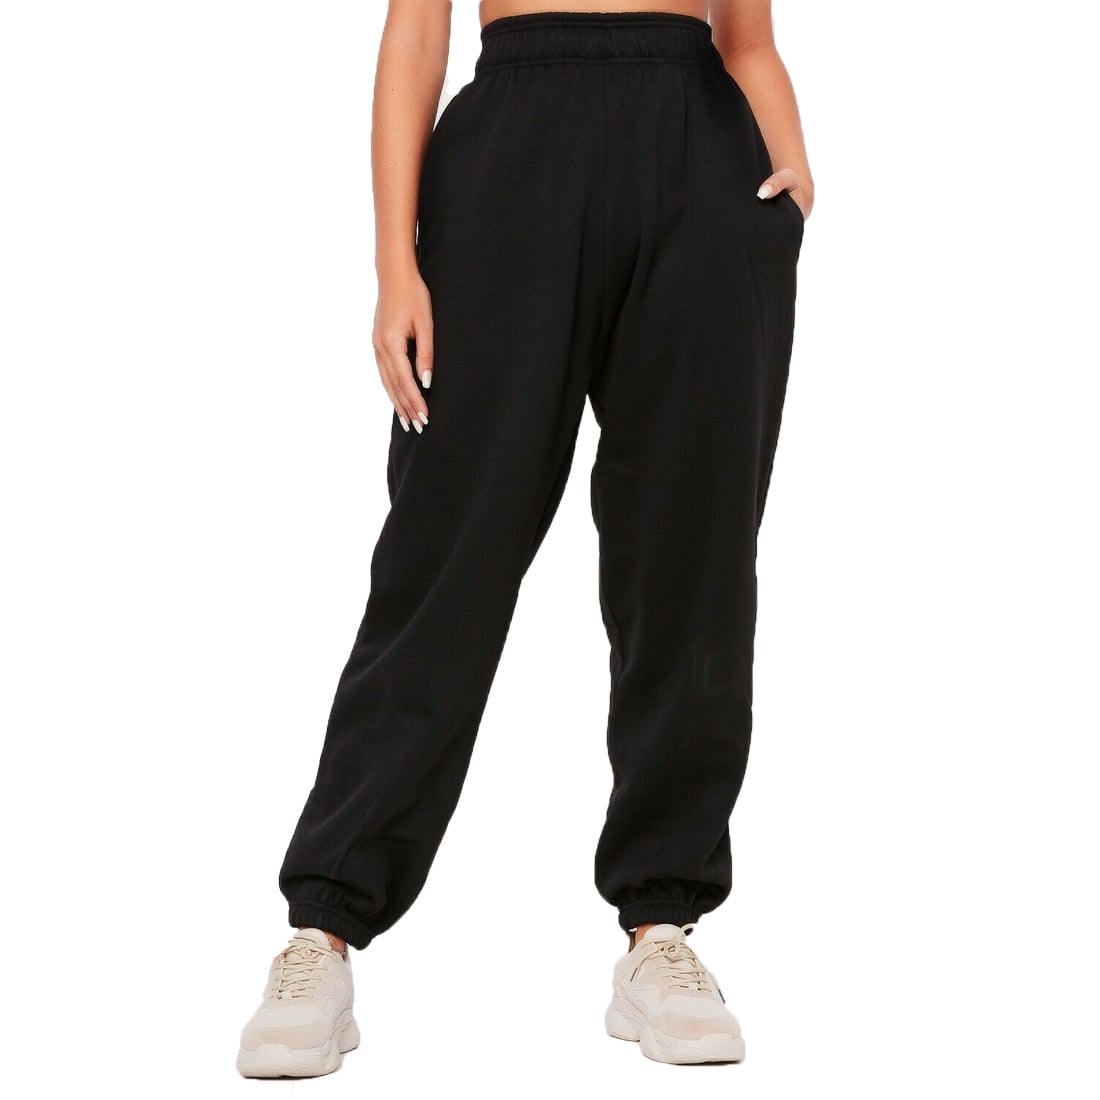 Women Casual Solid Color Sport Pants, Elastic Waist Ankle Cuff Loose  Sweatpants with Pocket 